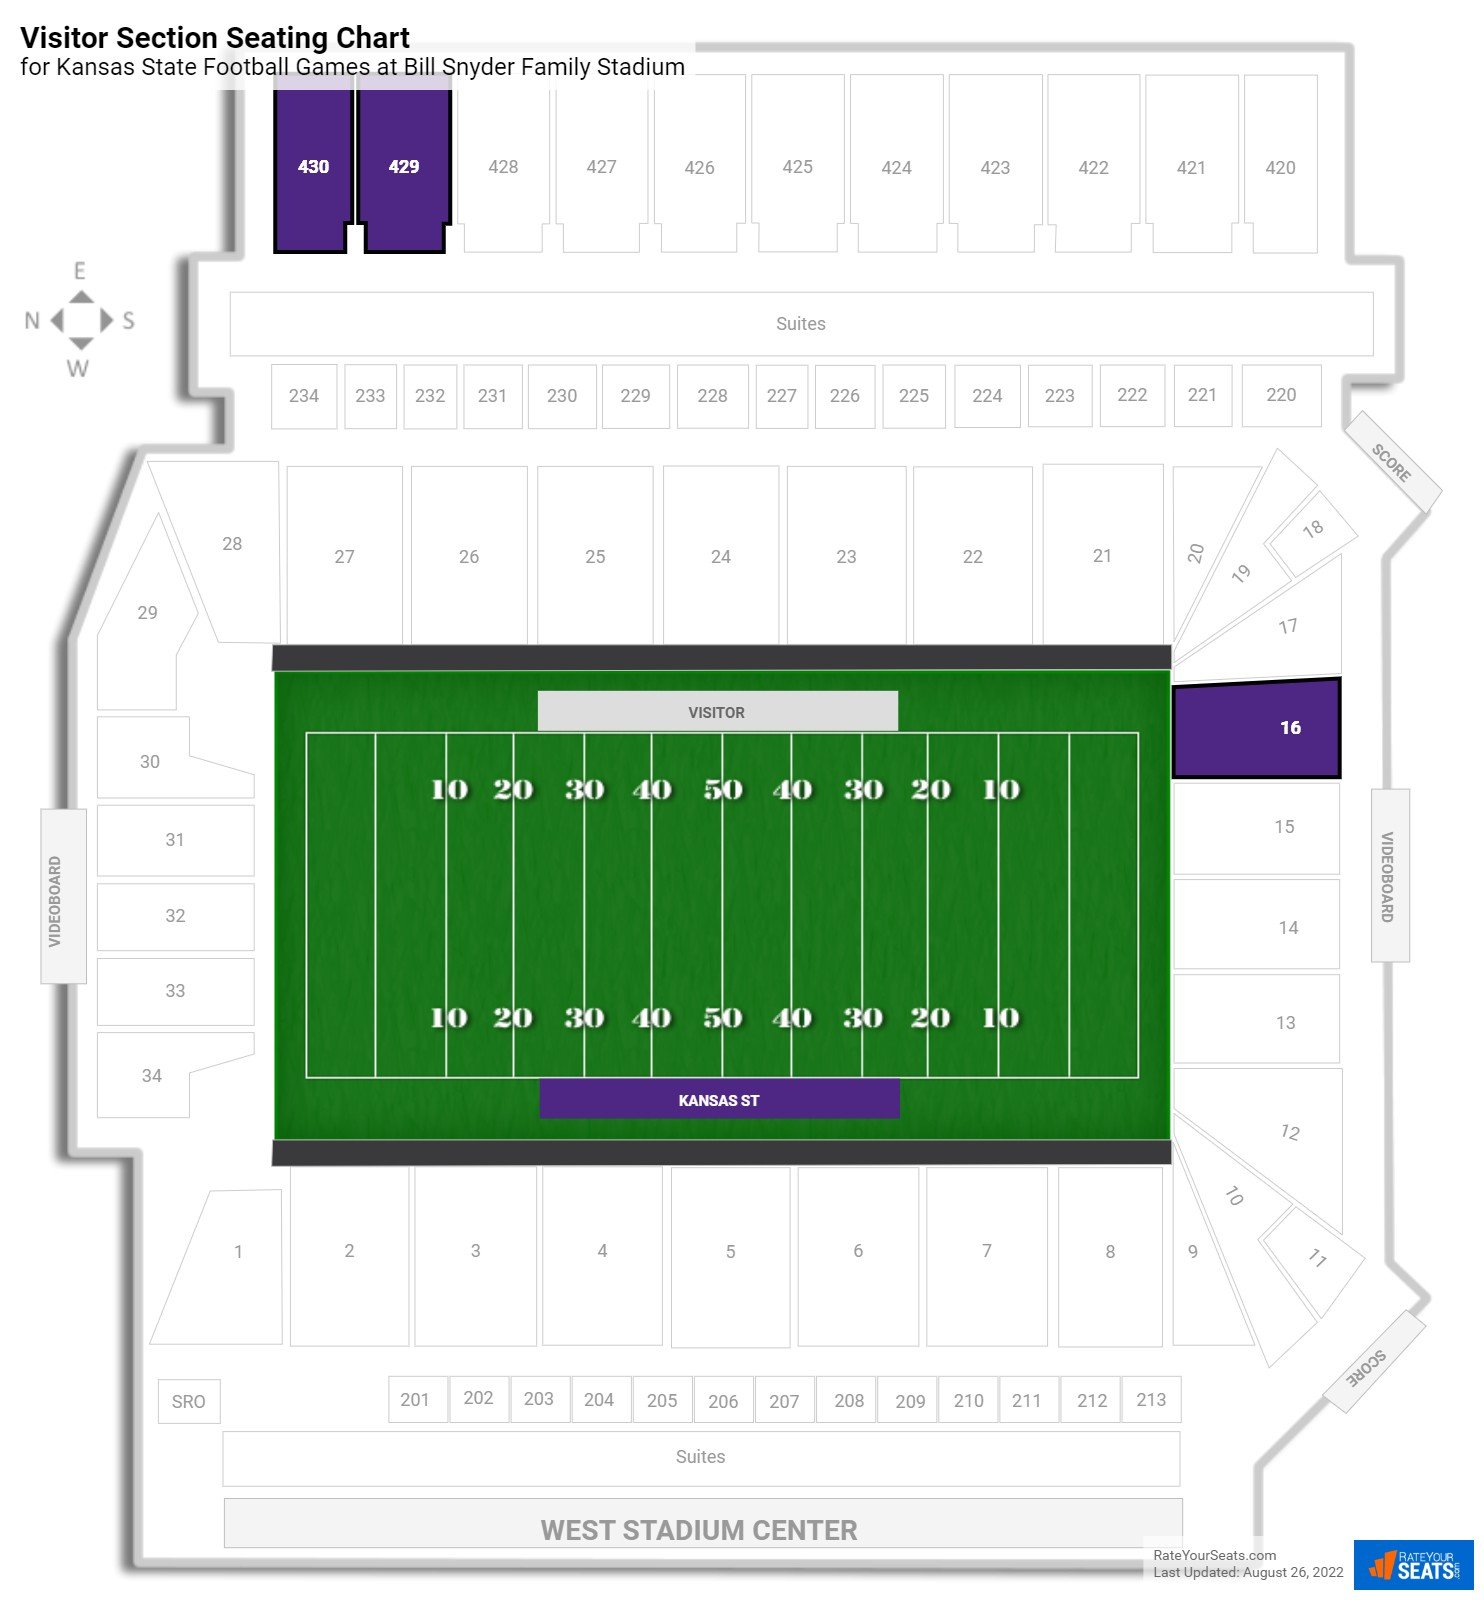 Kansas State Visitor Section Seating Chart at Bill Snyder Family Stadium